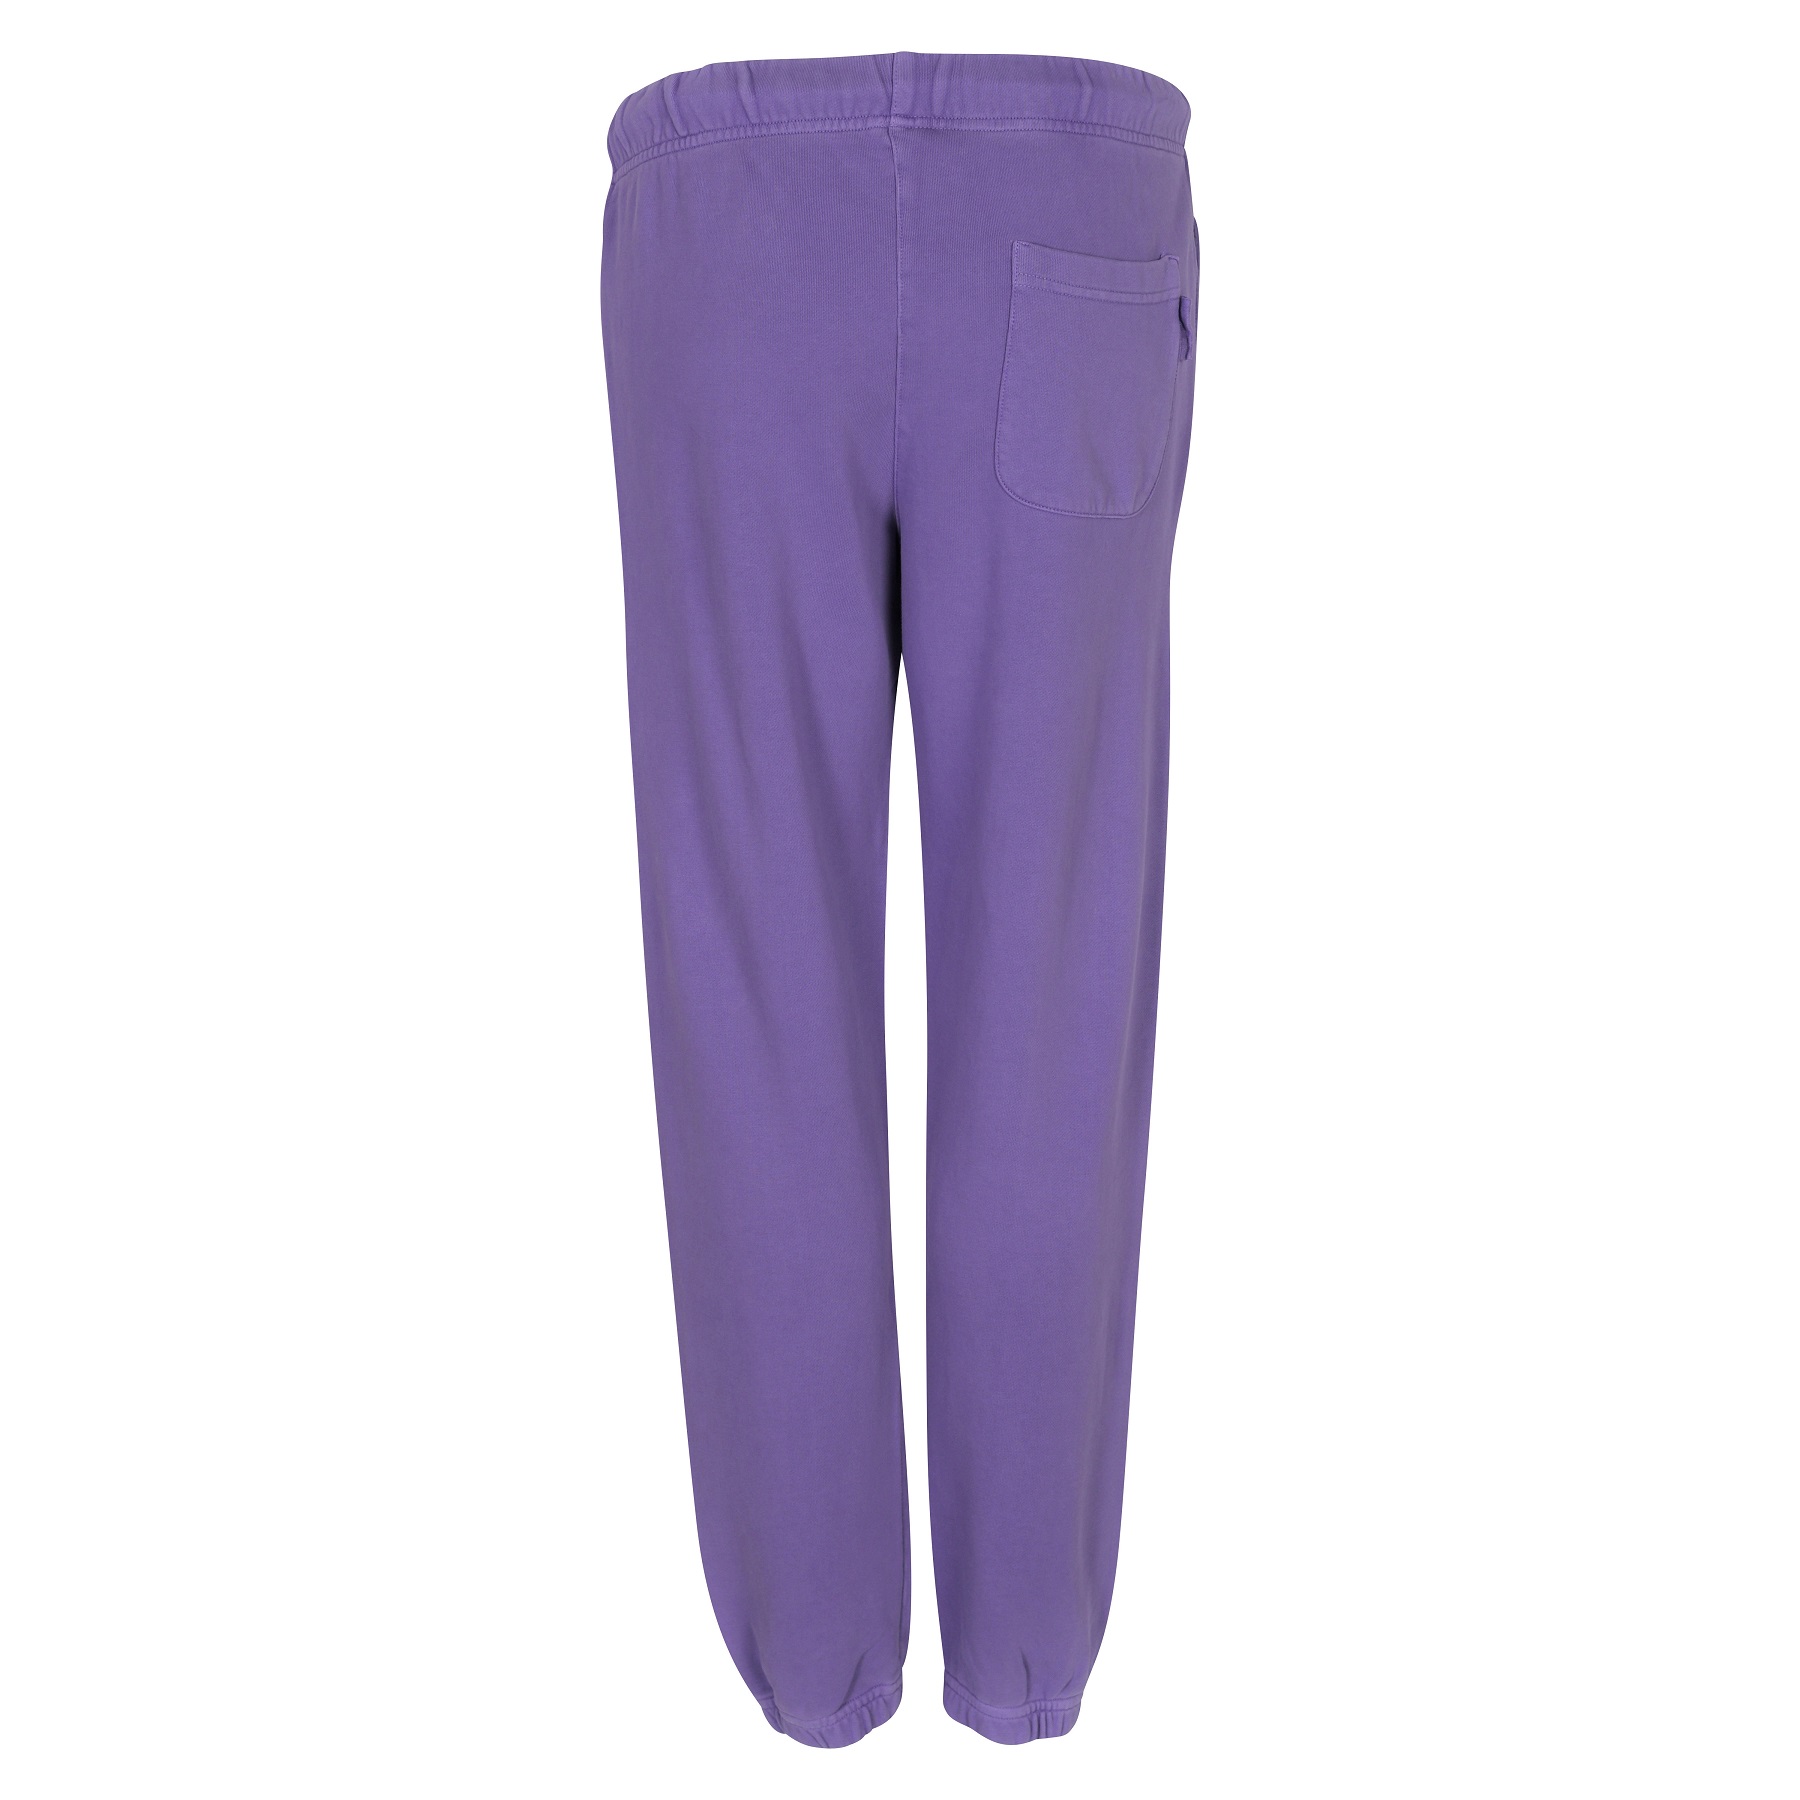 Autry Action Shoes Sweatpant Supervintage in Tinto Lilac